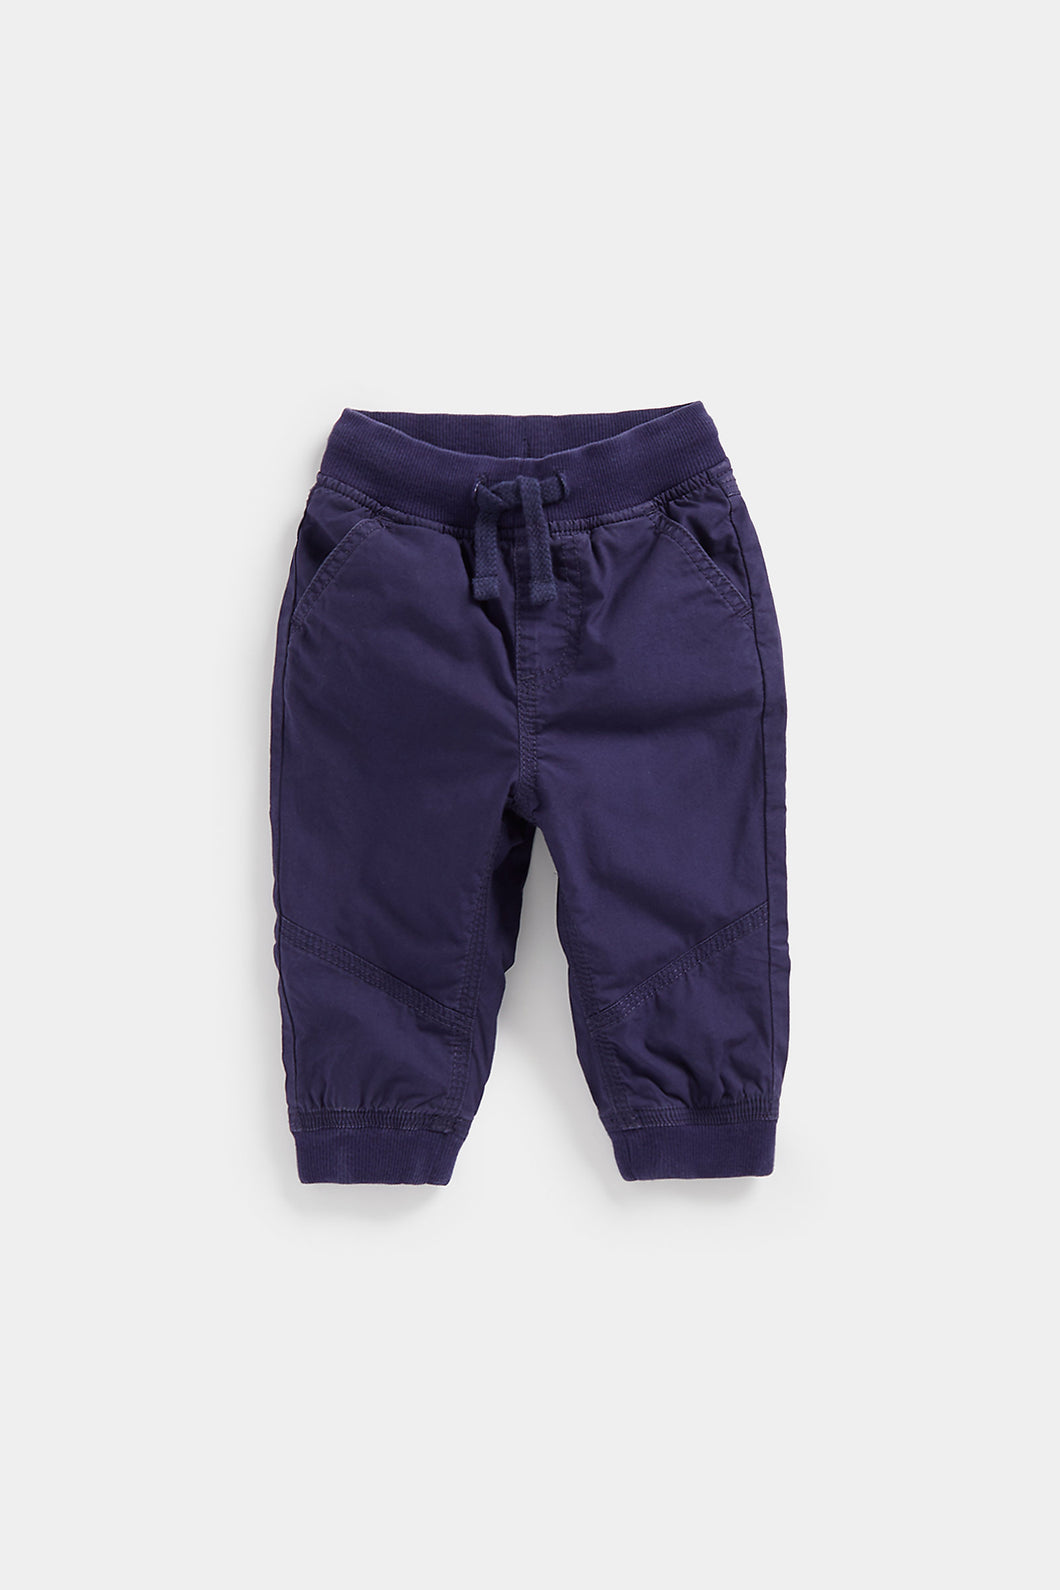 Mothercare Poplin Trousers - Jersey Lined